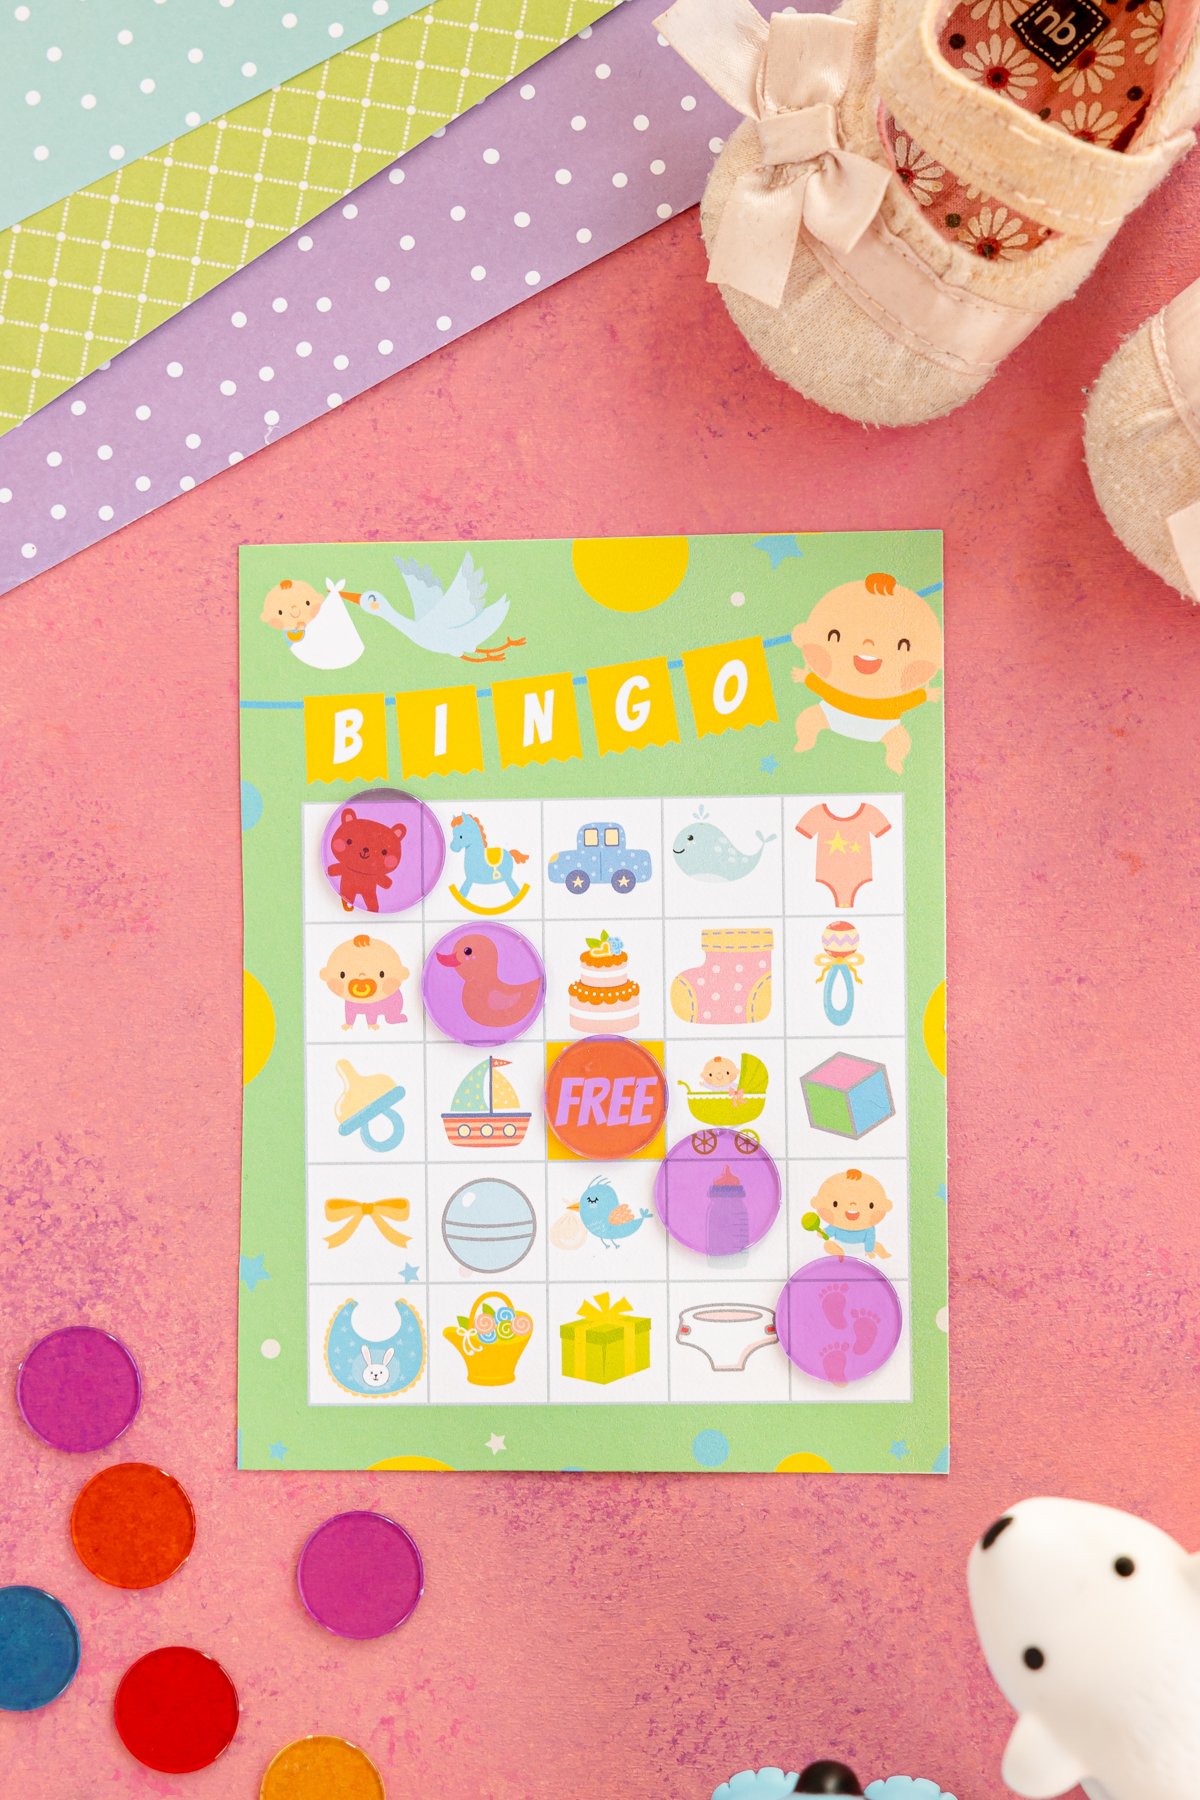 printed out baby shower bingo card with markers across it